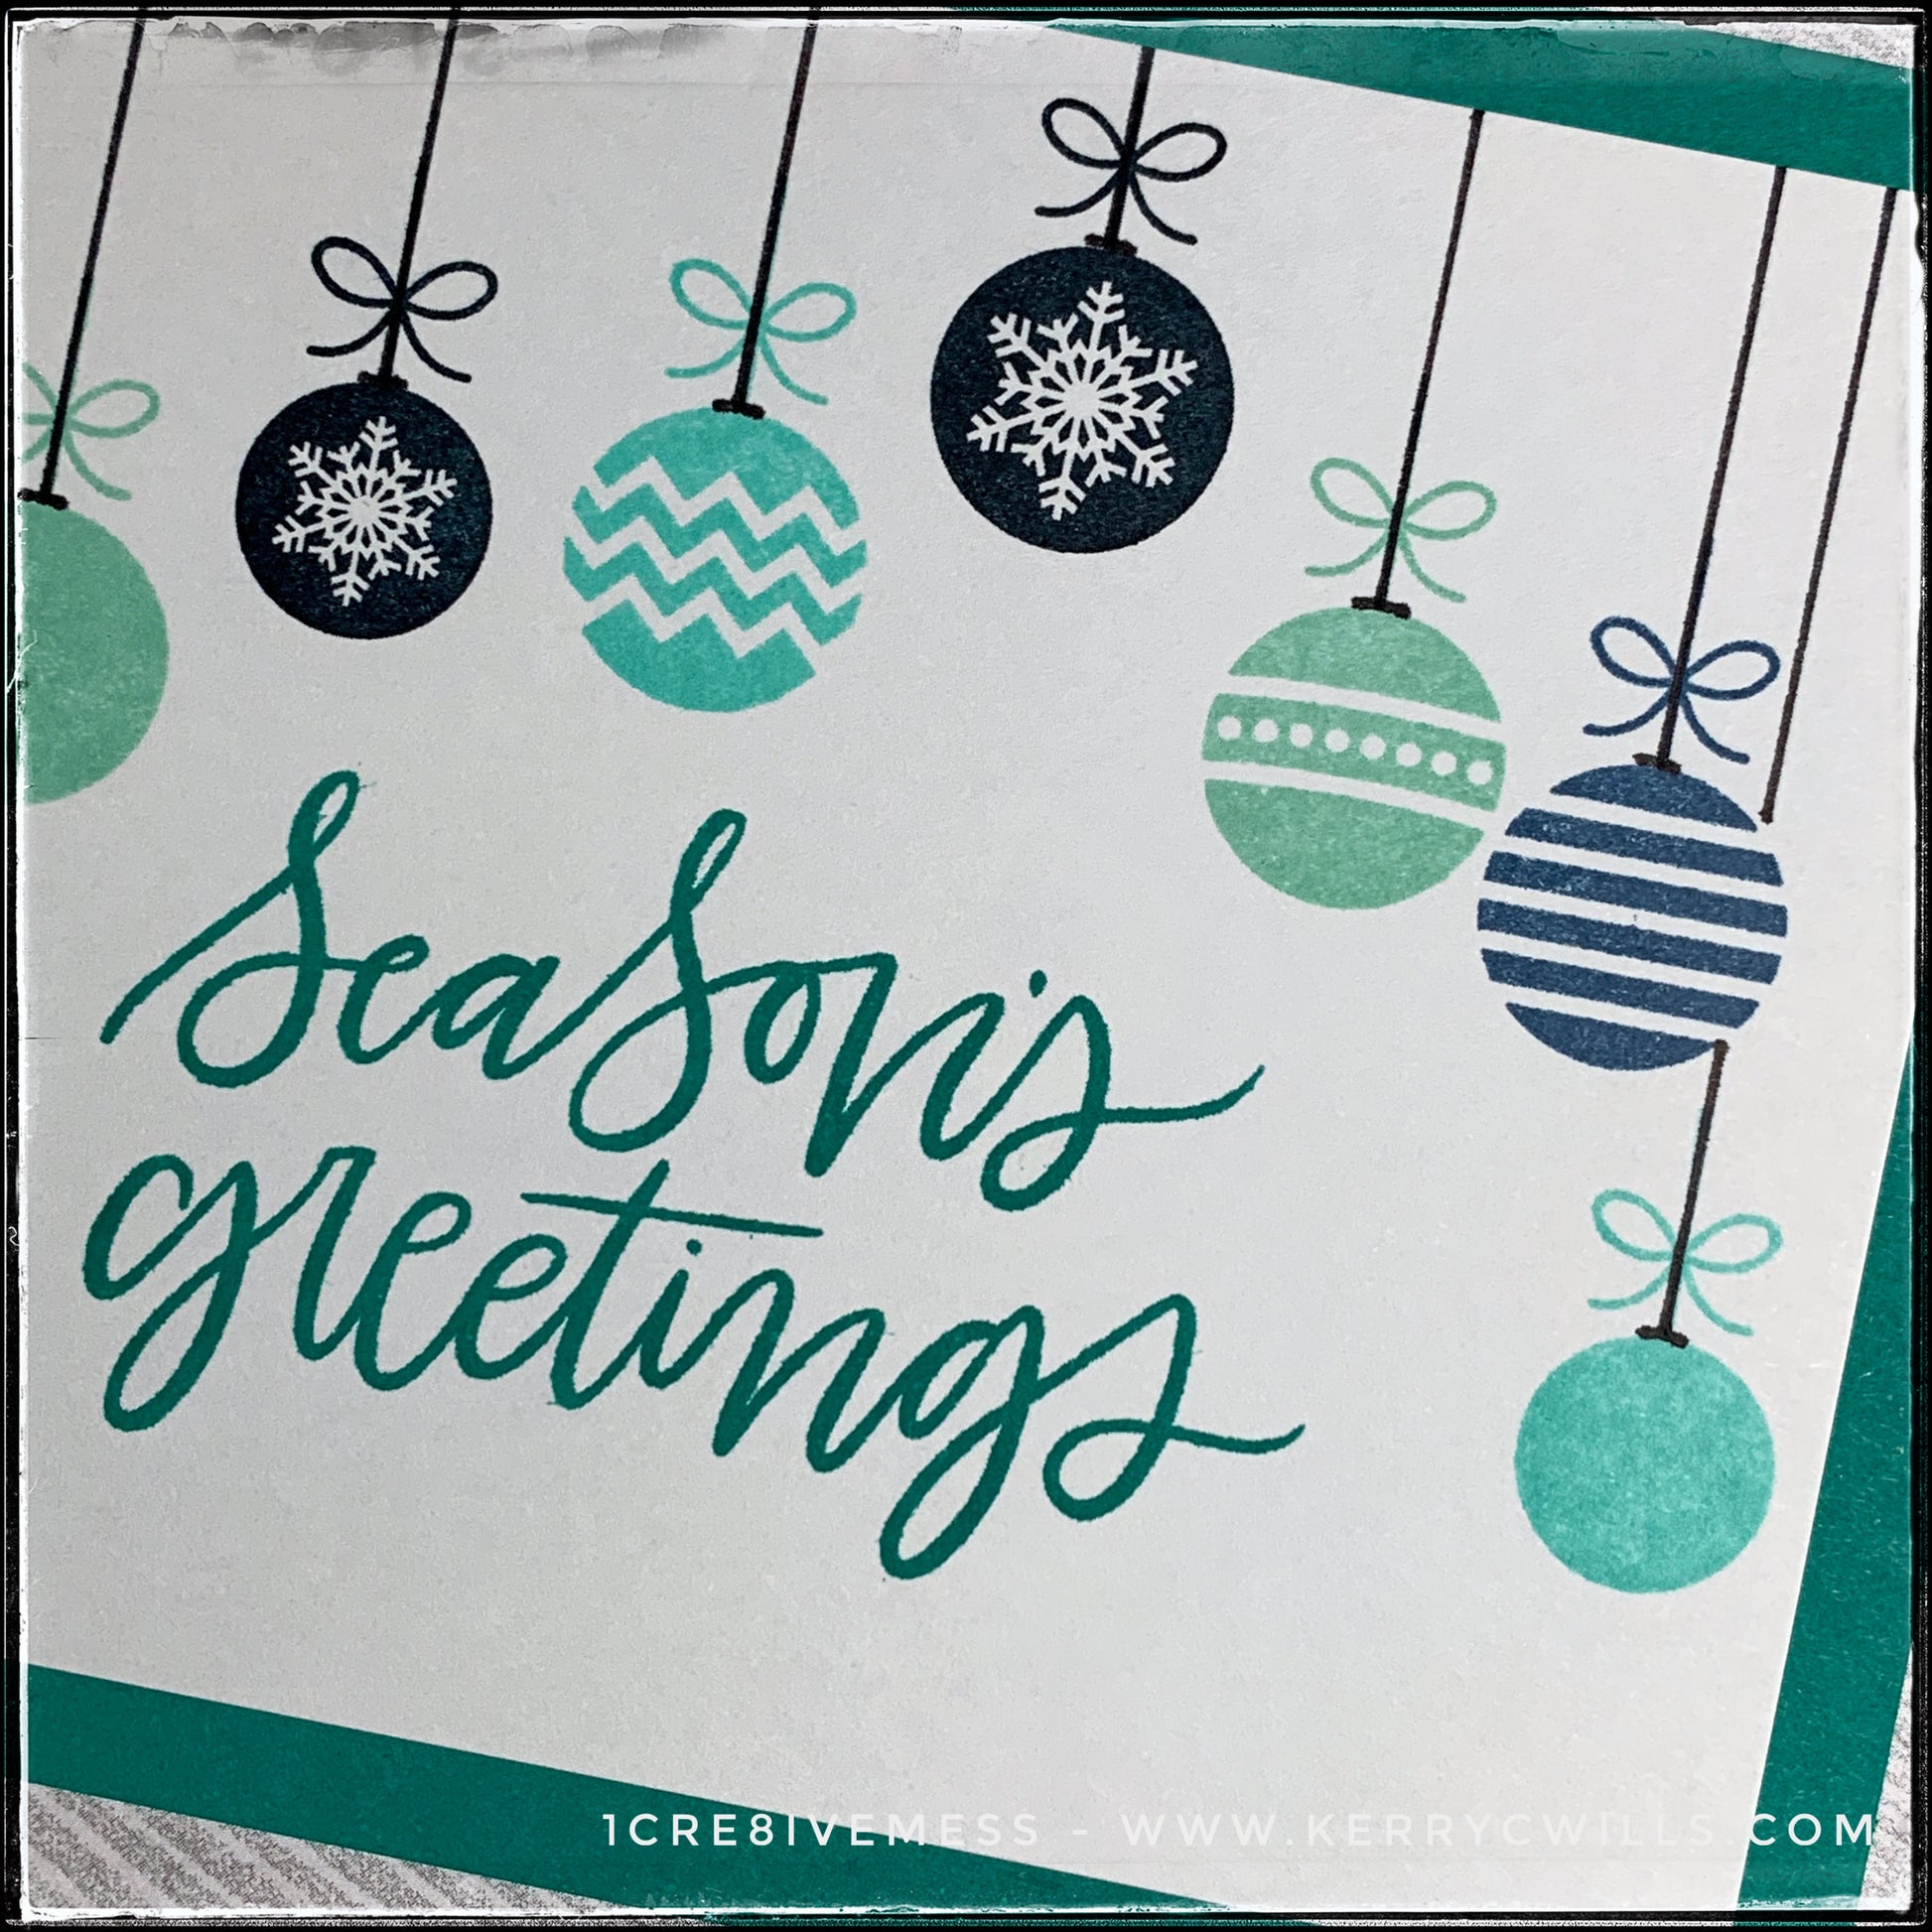 An up-close, angled view of the detail on several of the stamped ornaments. A hand drawn black line extends from the ornament to the top of the card panel, as if they are hanging. Patterns of the ornaments include chevrons, polka dots, solid balls, stripes and snowflakes. The sentiment "season's greetings" is nice and big and bold in the center of this handmade card. 